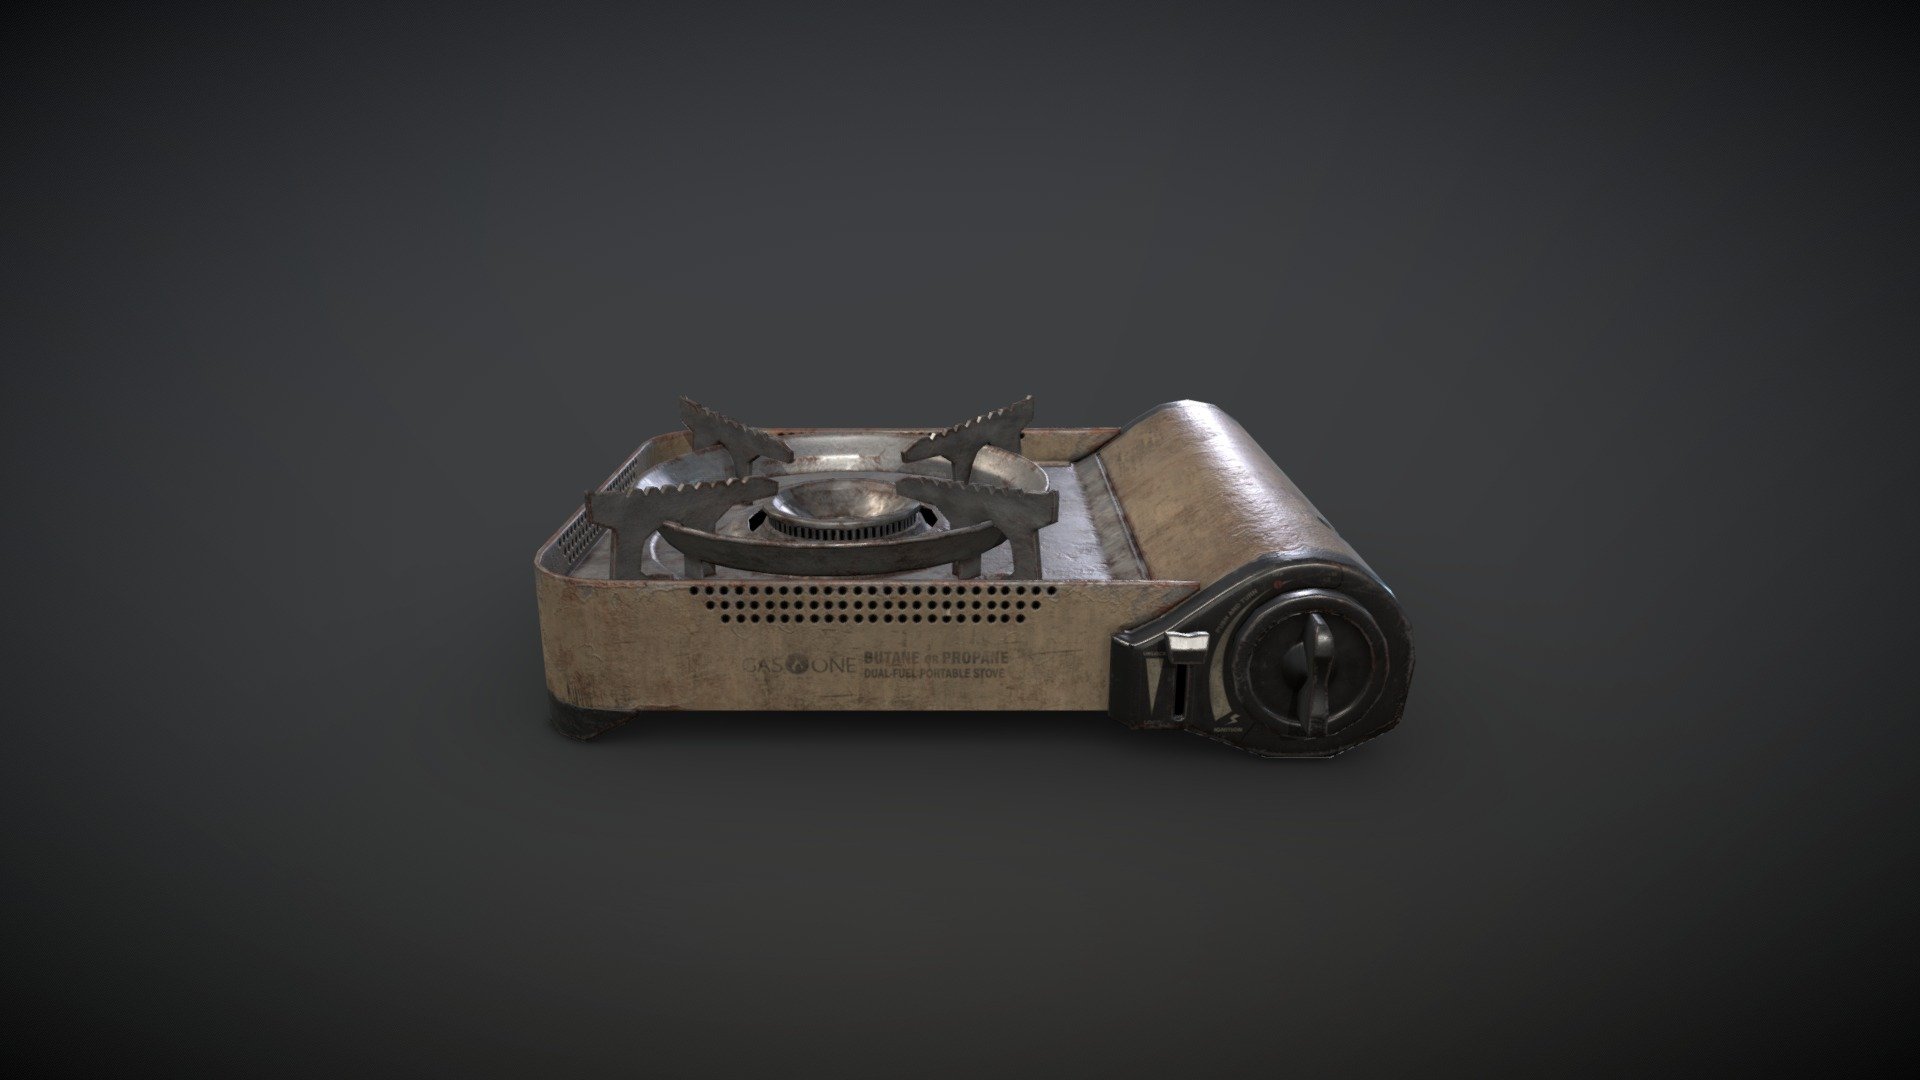 Realistic Portable Stove based on real life product.
low poly - 4416 TRIS
2K texture, 5 maps (Albedo, Metalic, Roughness, Normal, AO)

I made this to learn about game assets - Portable Stove - 3D model by aprillioalbert 3d model